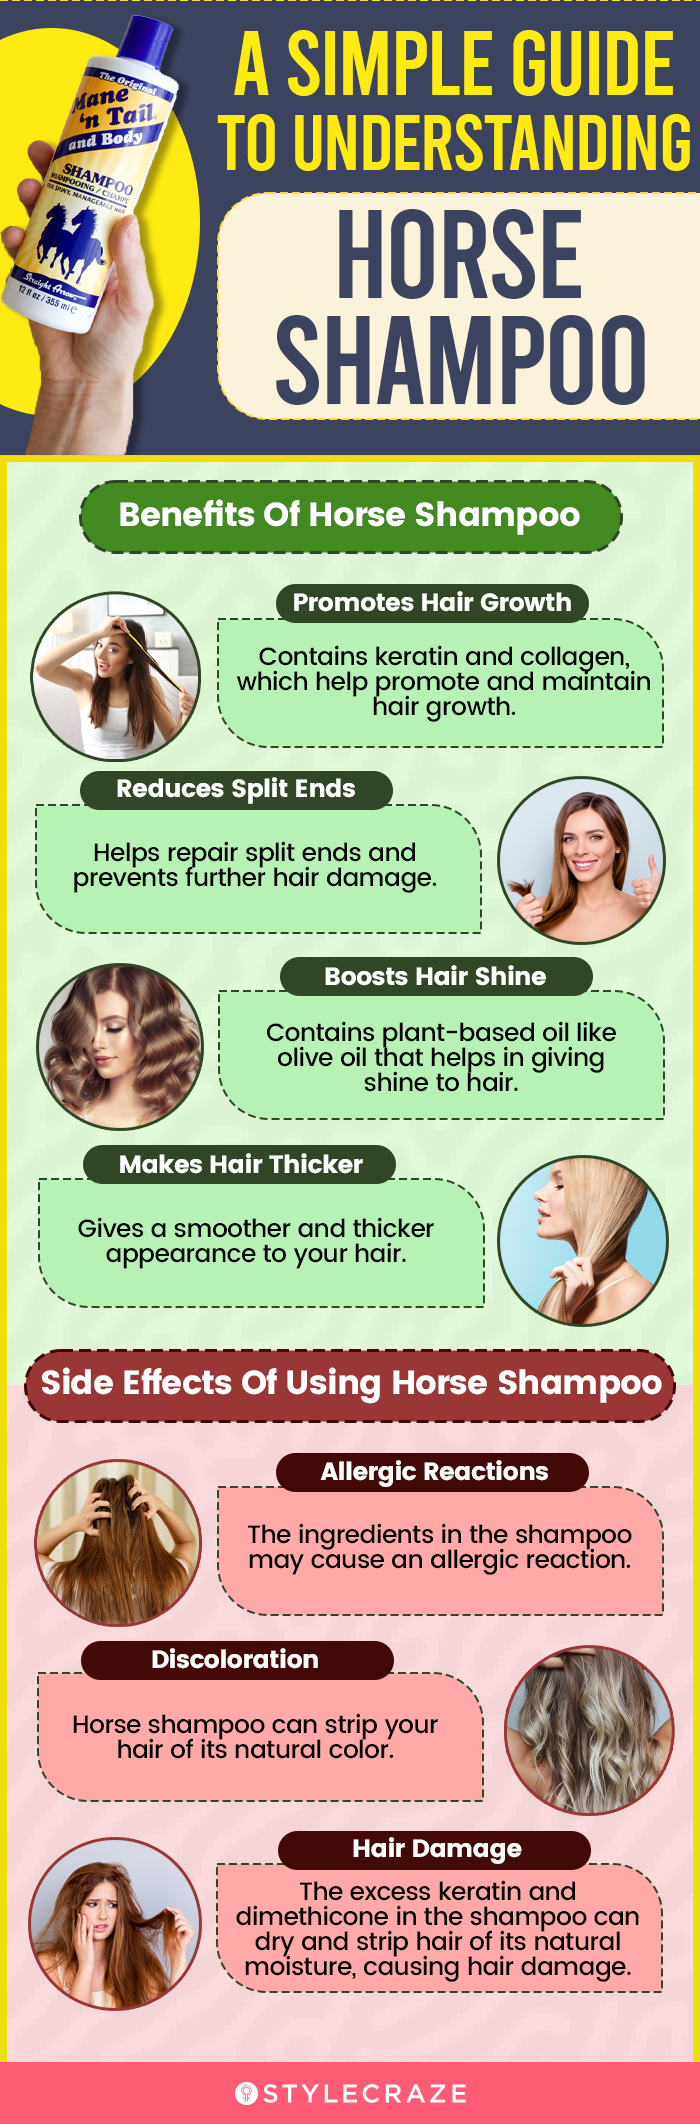 Horse Shampoo: Benefits, Side Effects, And How To Use